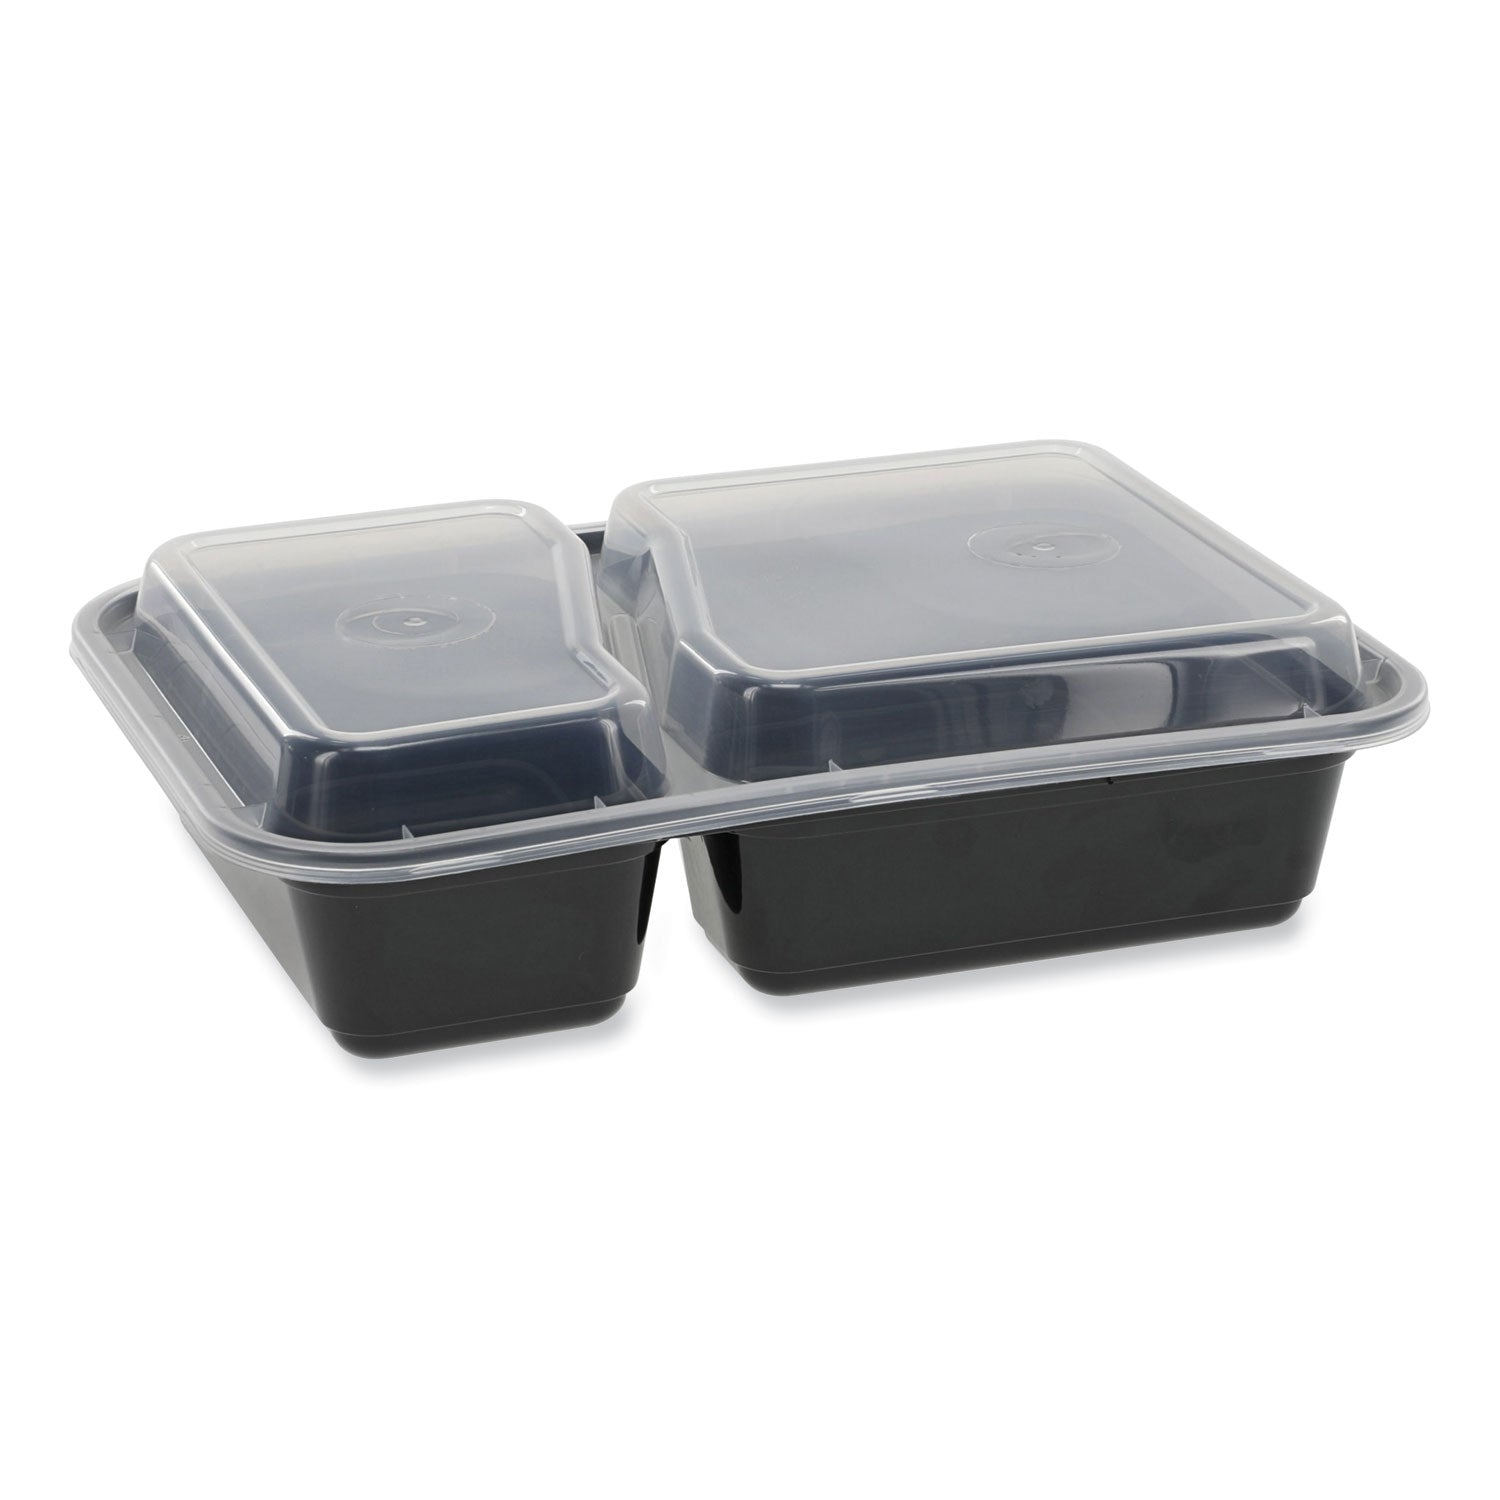 newspring-versatainer-microwavable-containers-rectangular-2-compartment-30-oz-6-x-85-x-25-black-clear-plastic-150-ct_pctnc8288b - 1